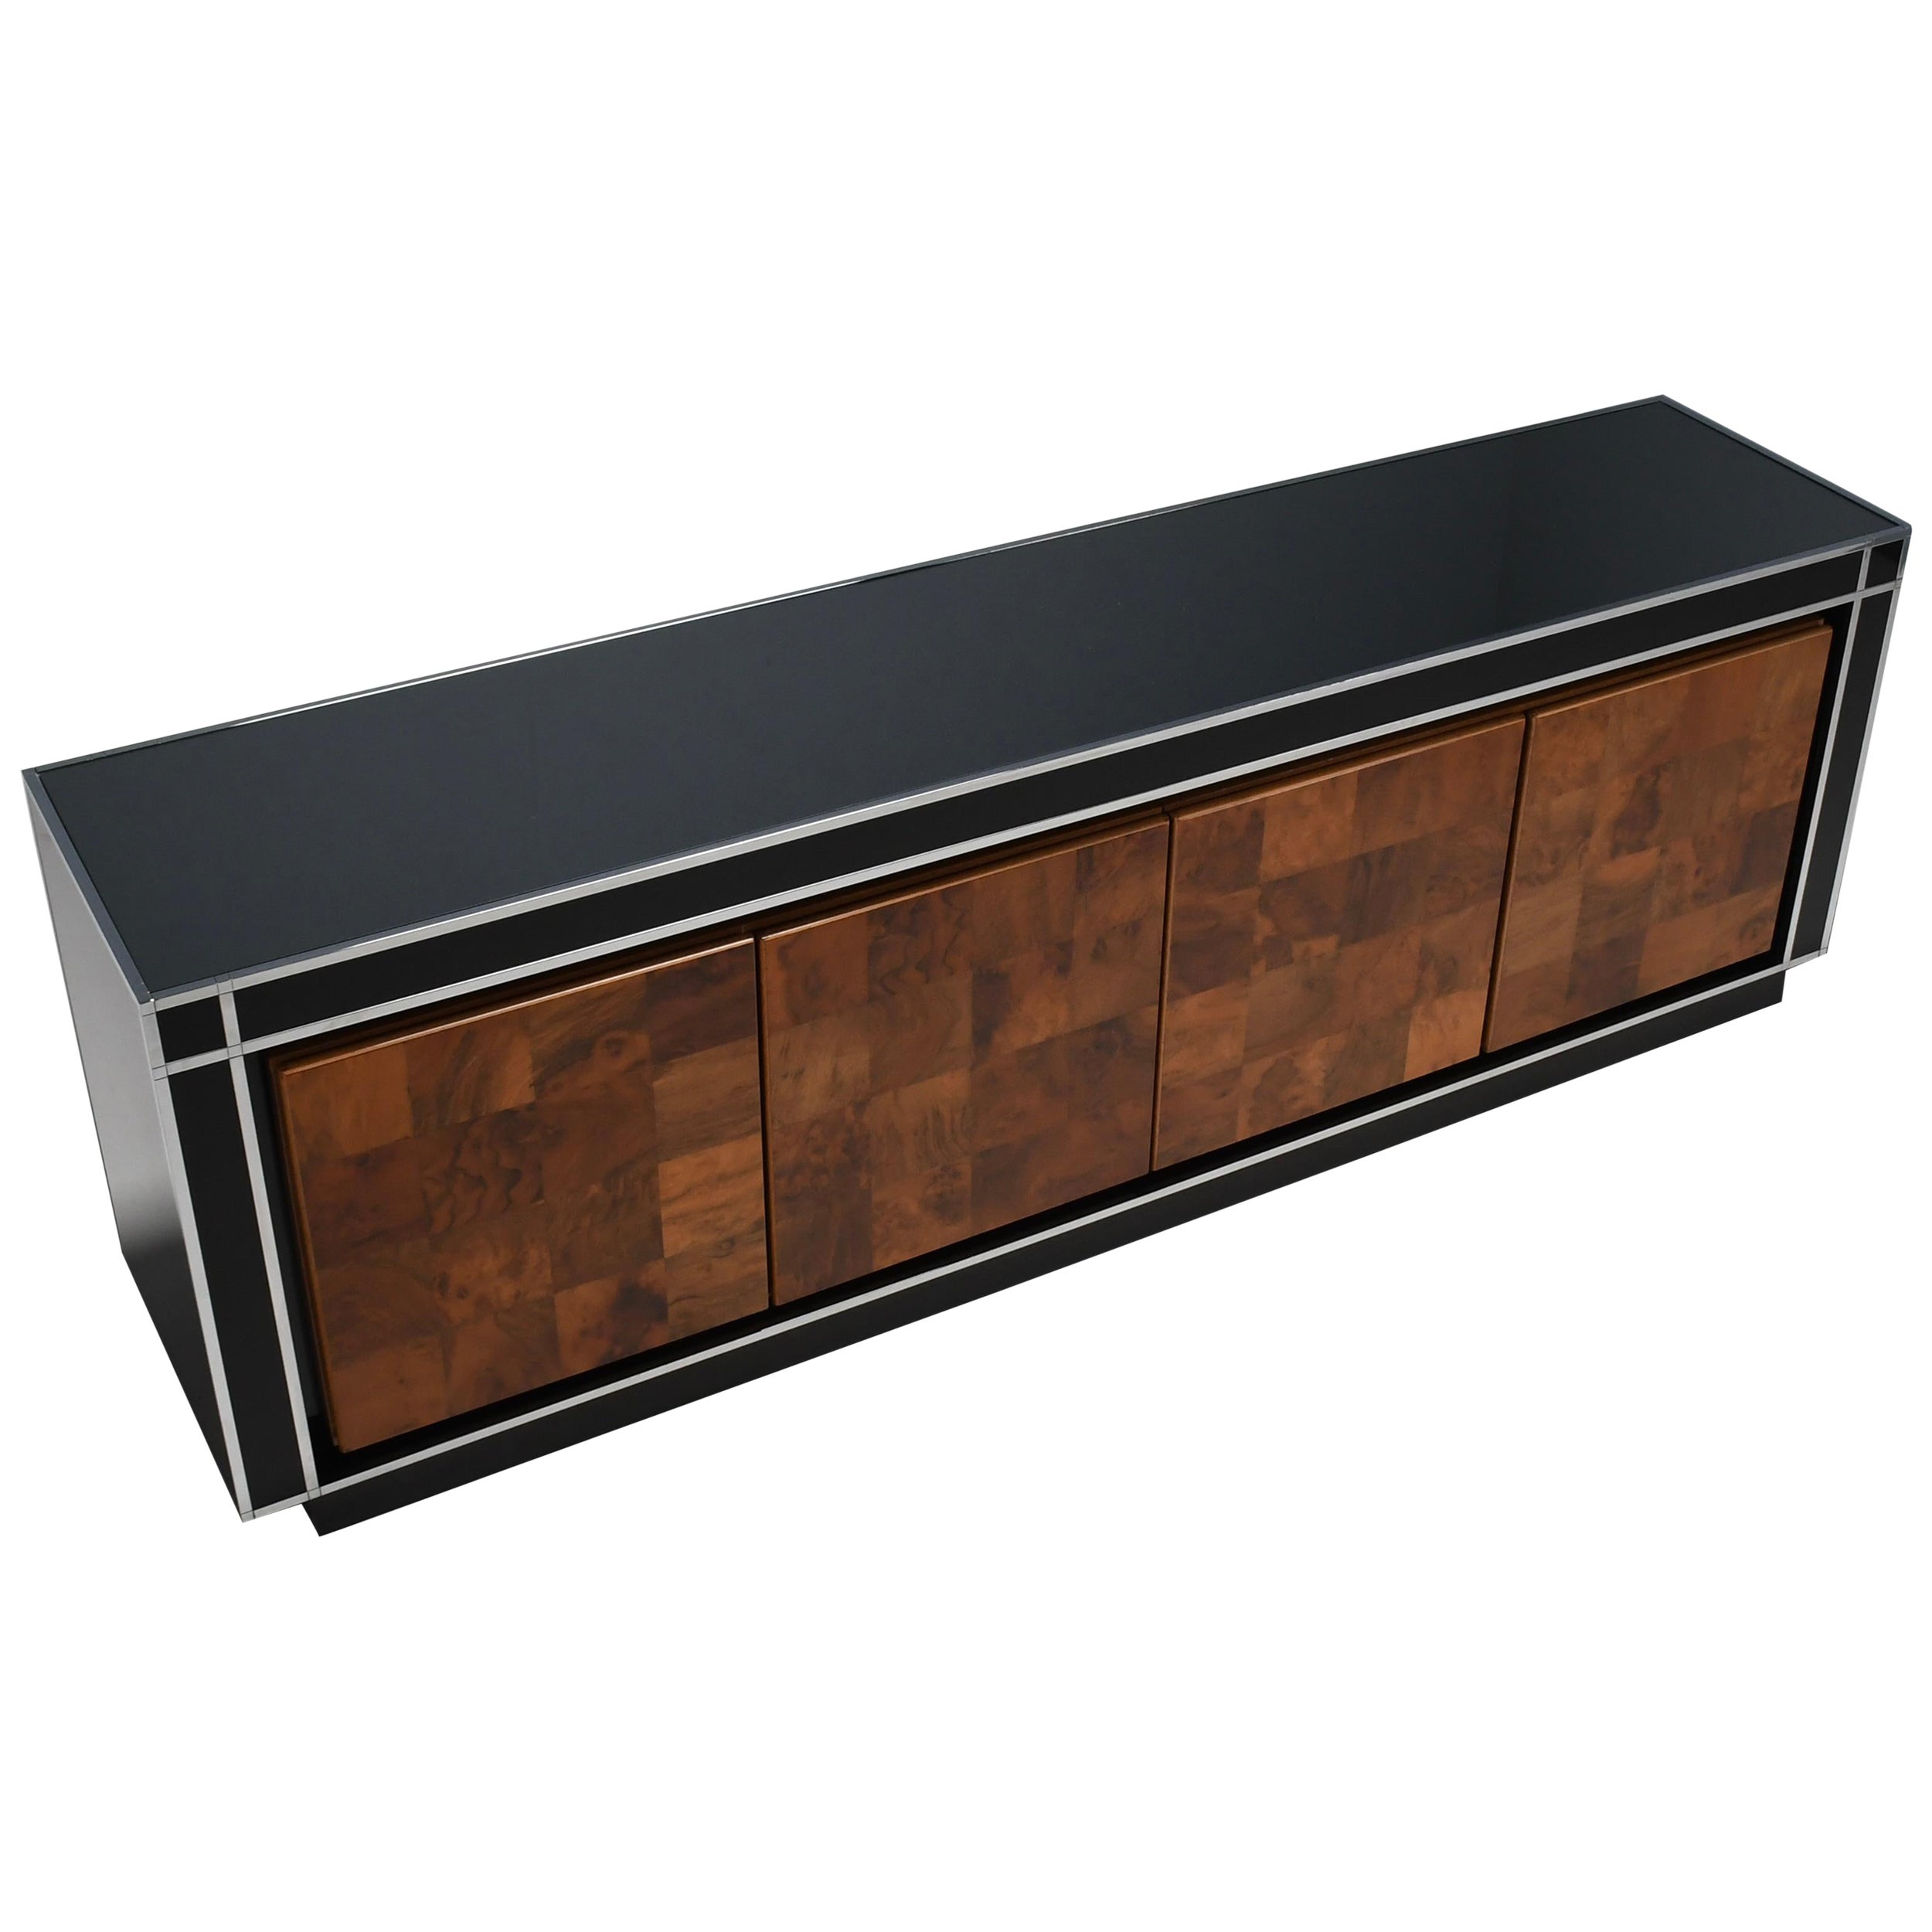 Impressive Italian Sideboard by Willy Rizzo for Mario Sabot, 1970s For Sale